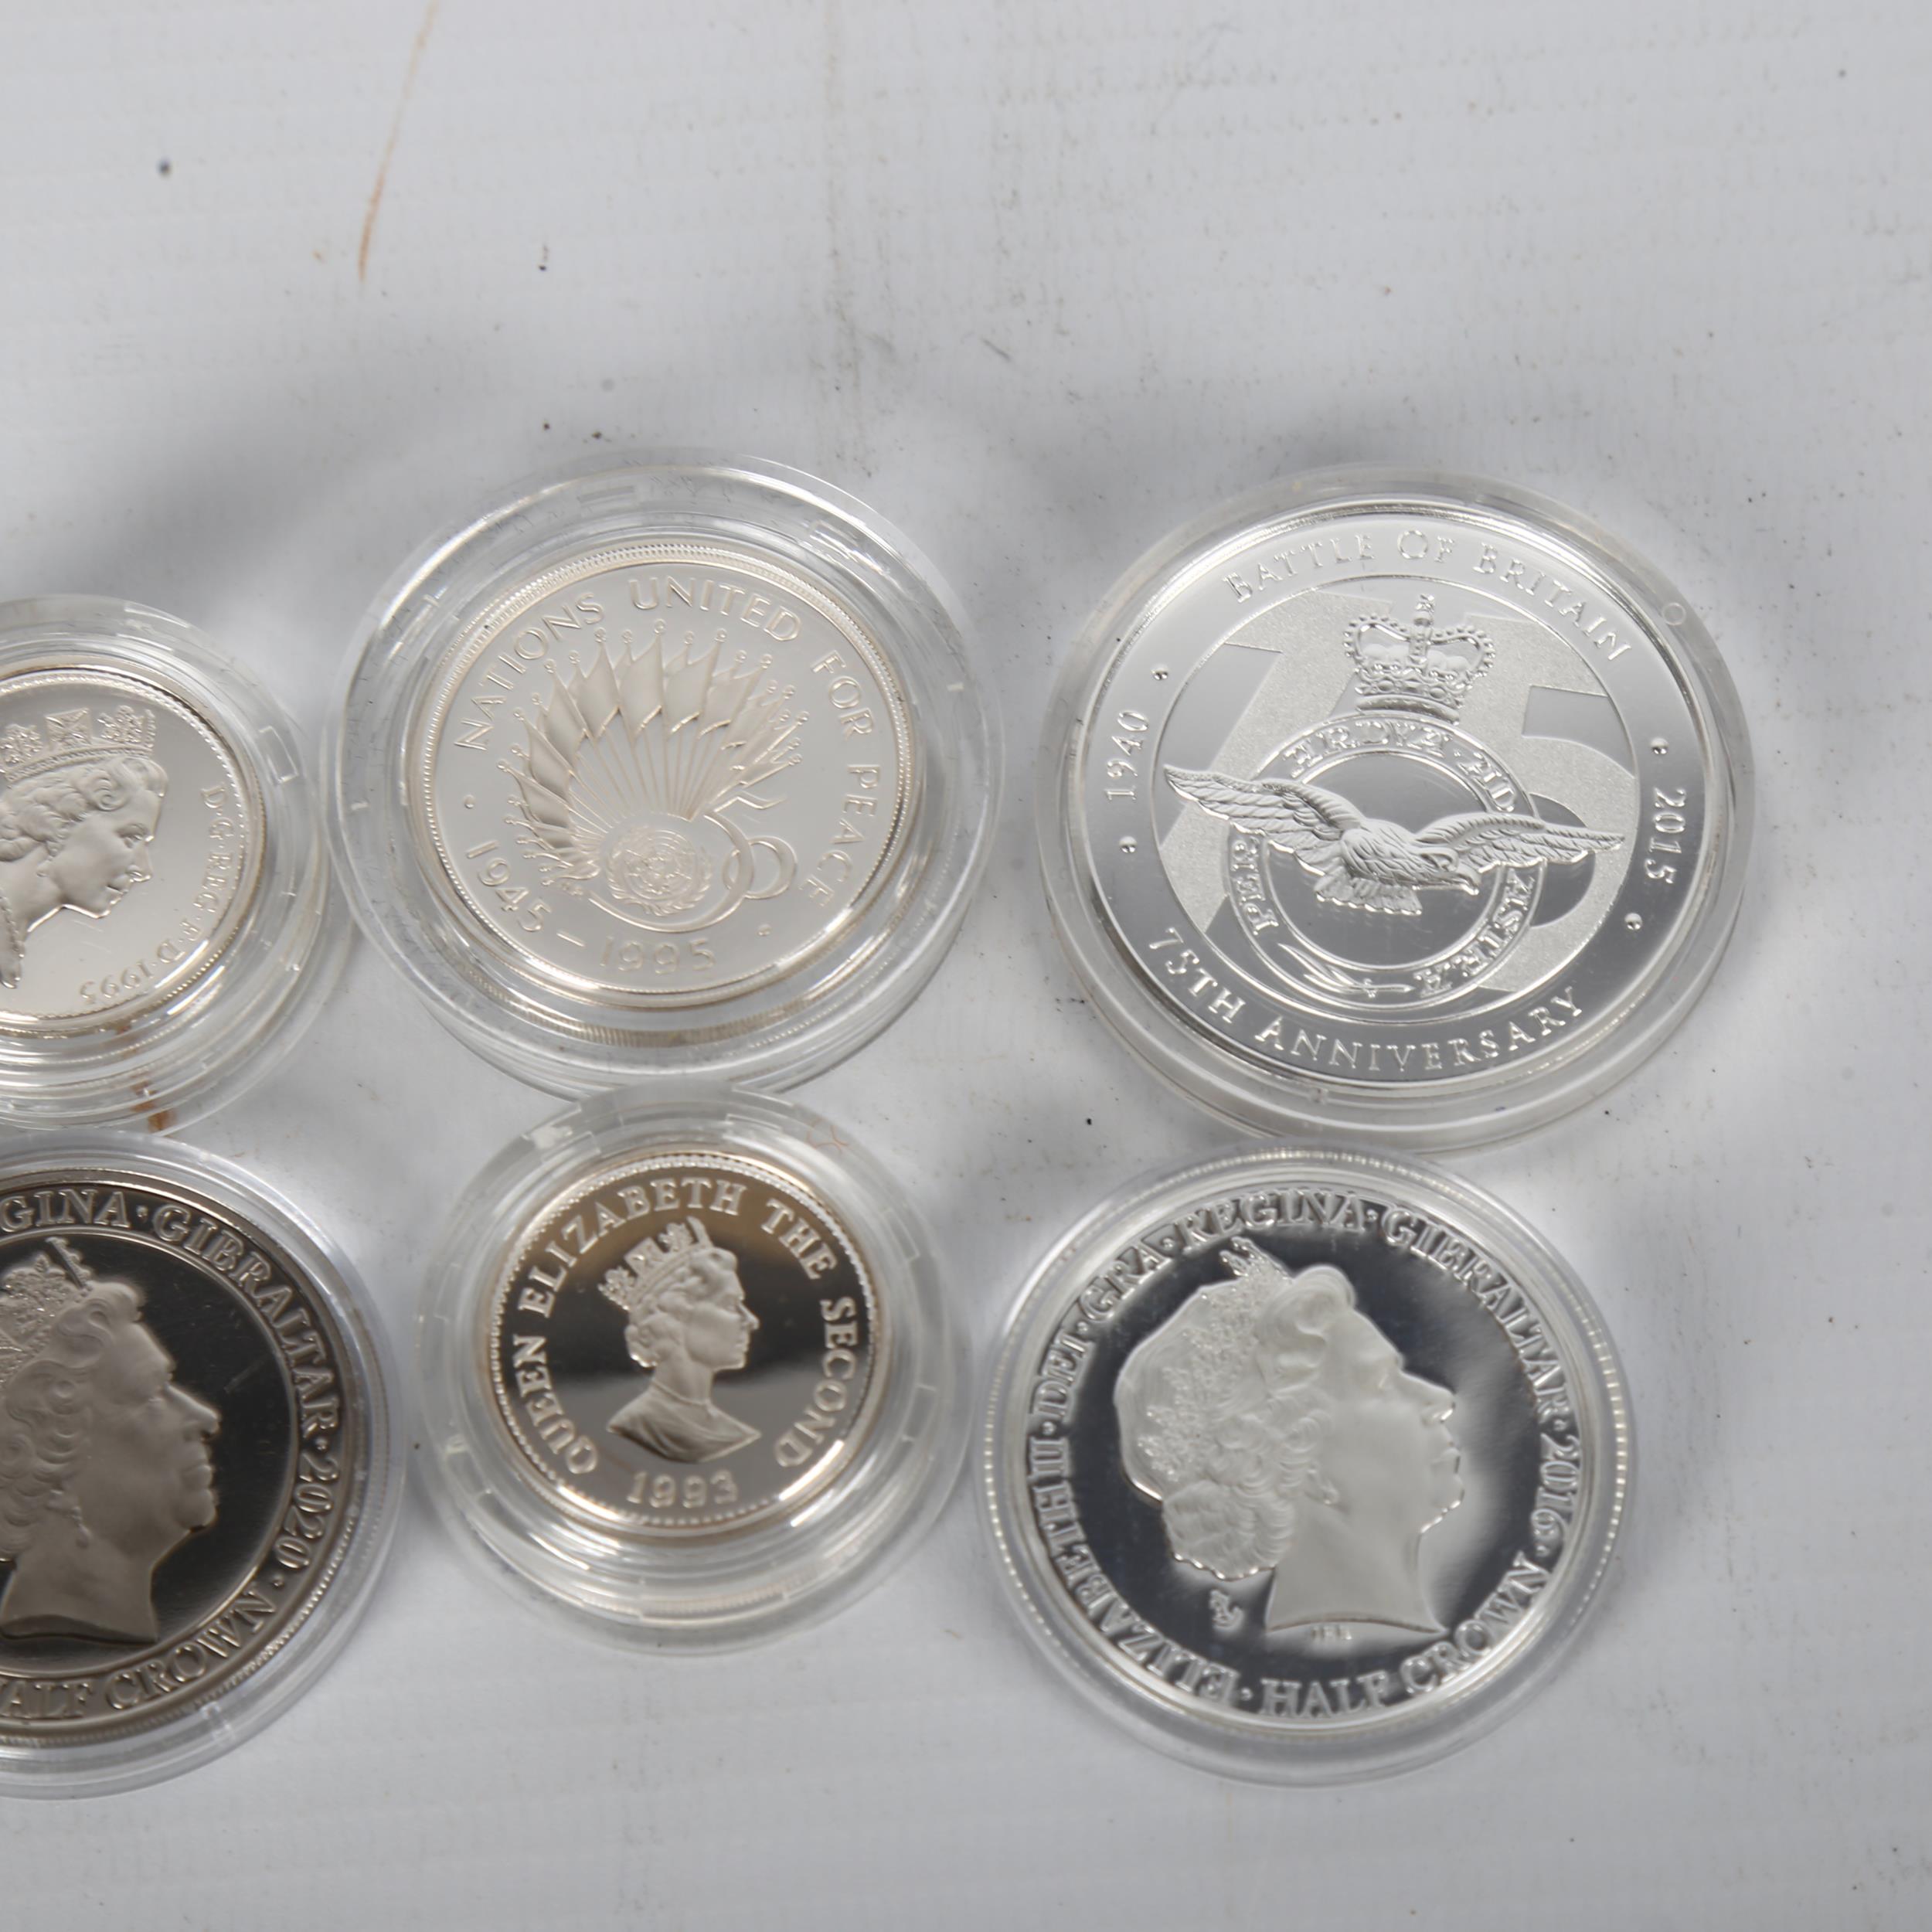 4 silver proof coins in capsules, Battle of Britain 75th Anniversary and 3 others WW2 related - Image 2 of 3